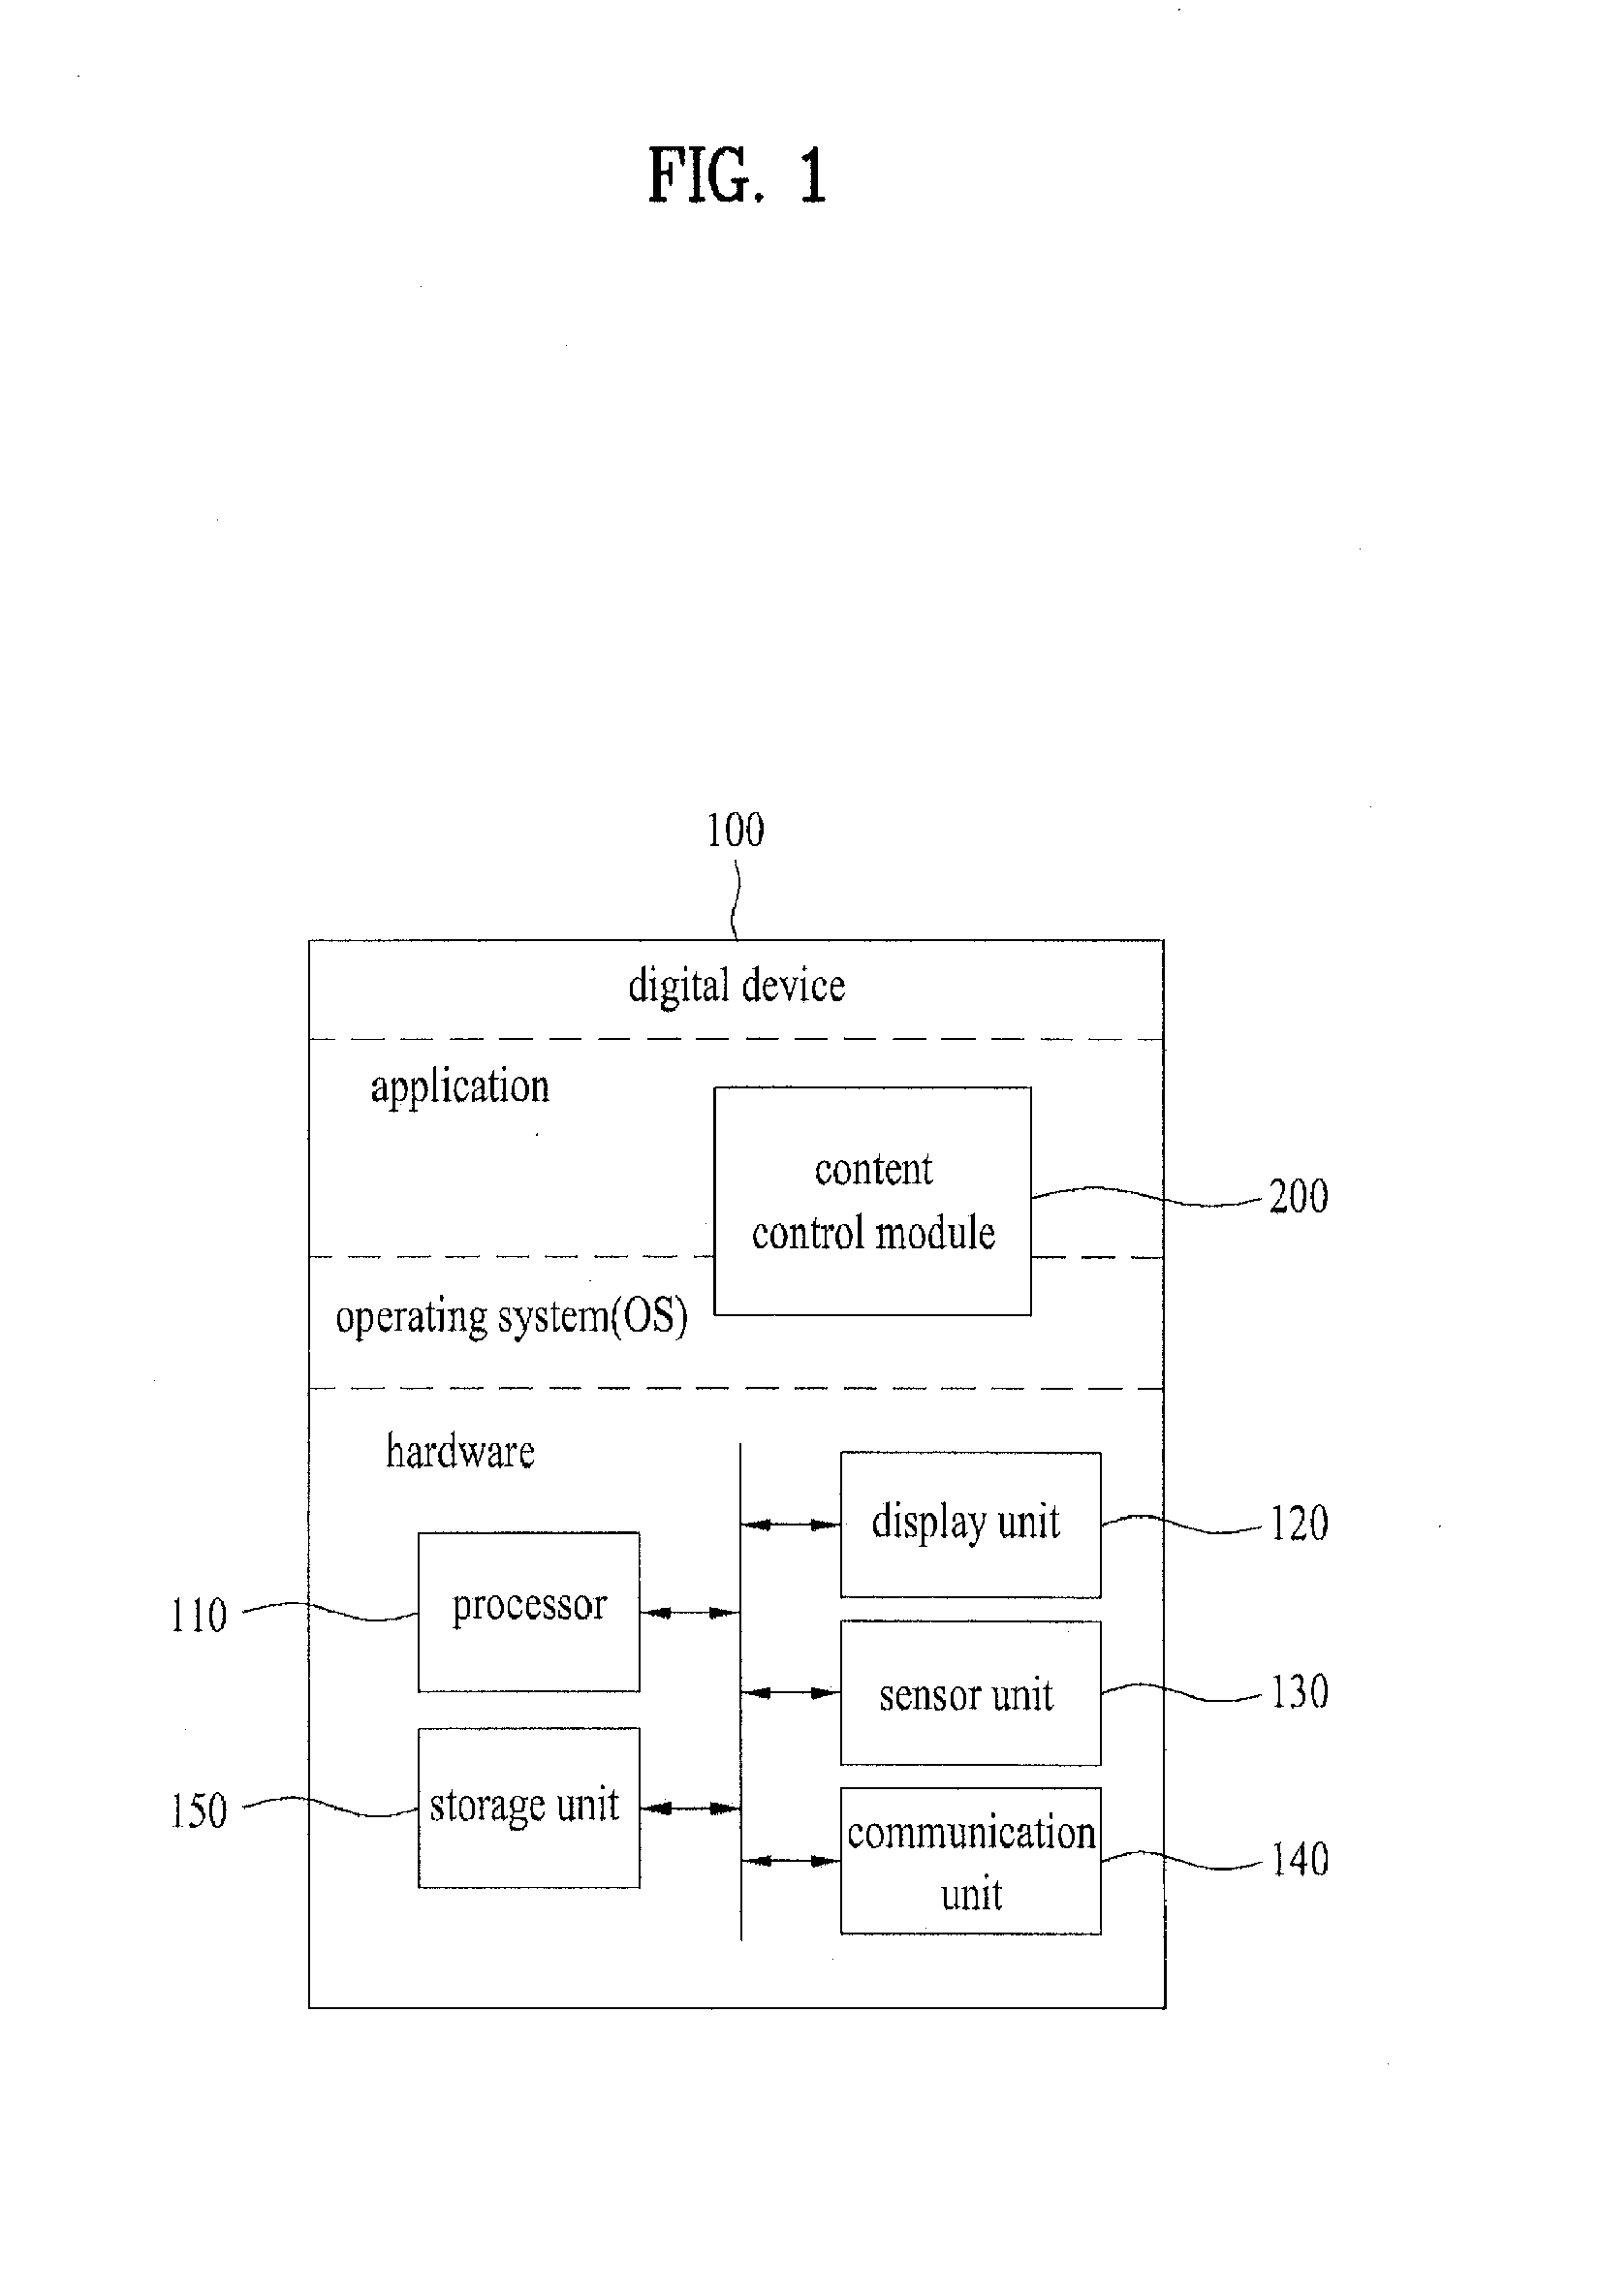 Method for controlling content and digital device using the same